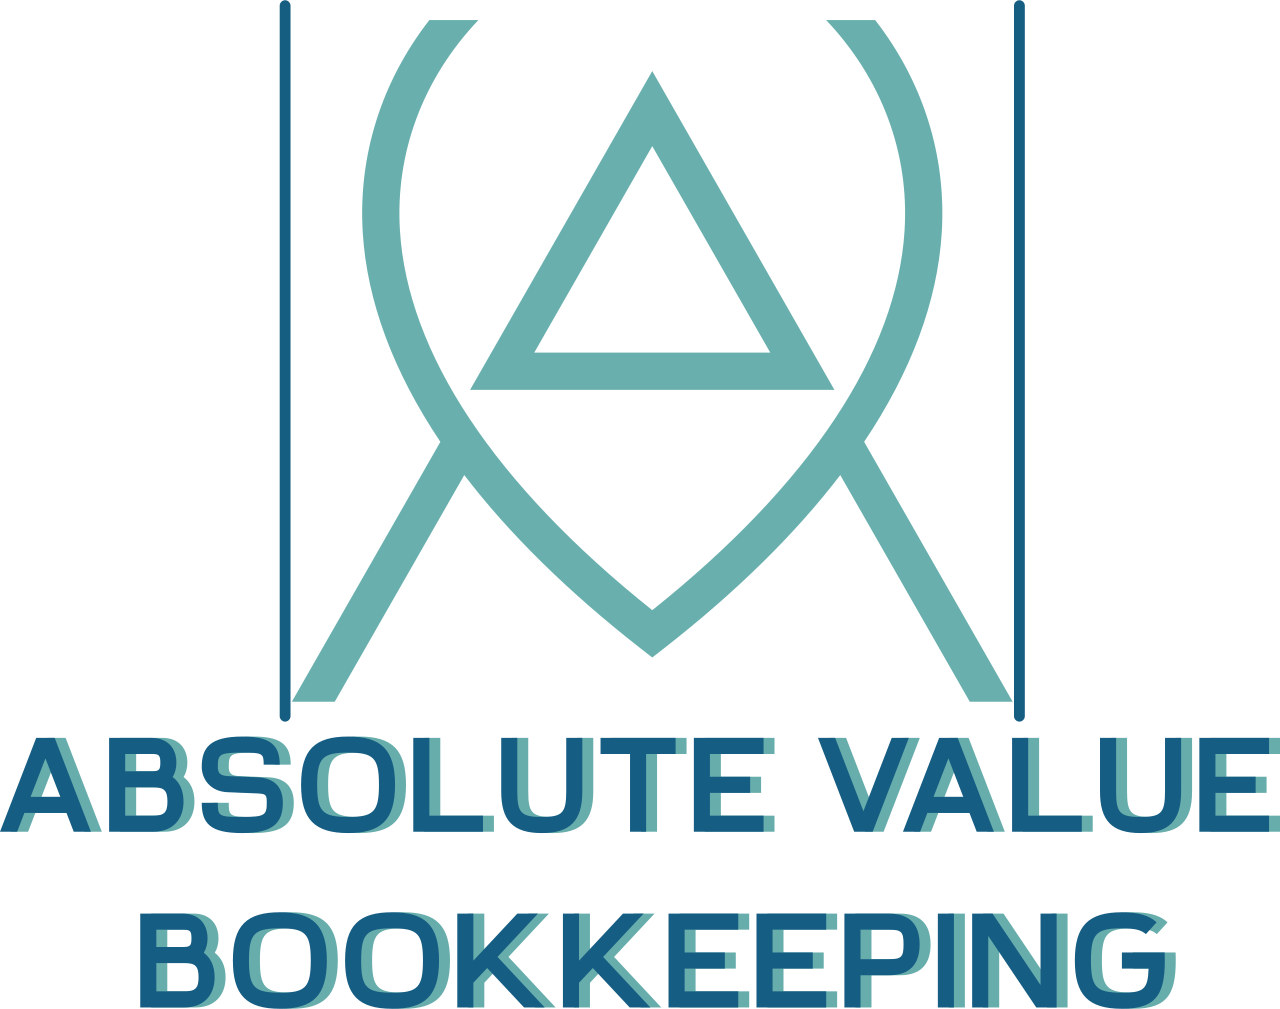 Absolute Value 
bookkeeping's logo